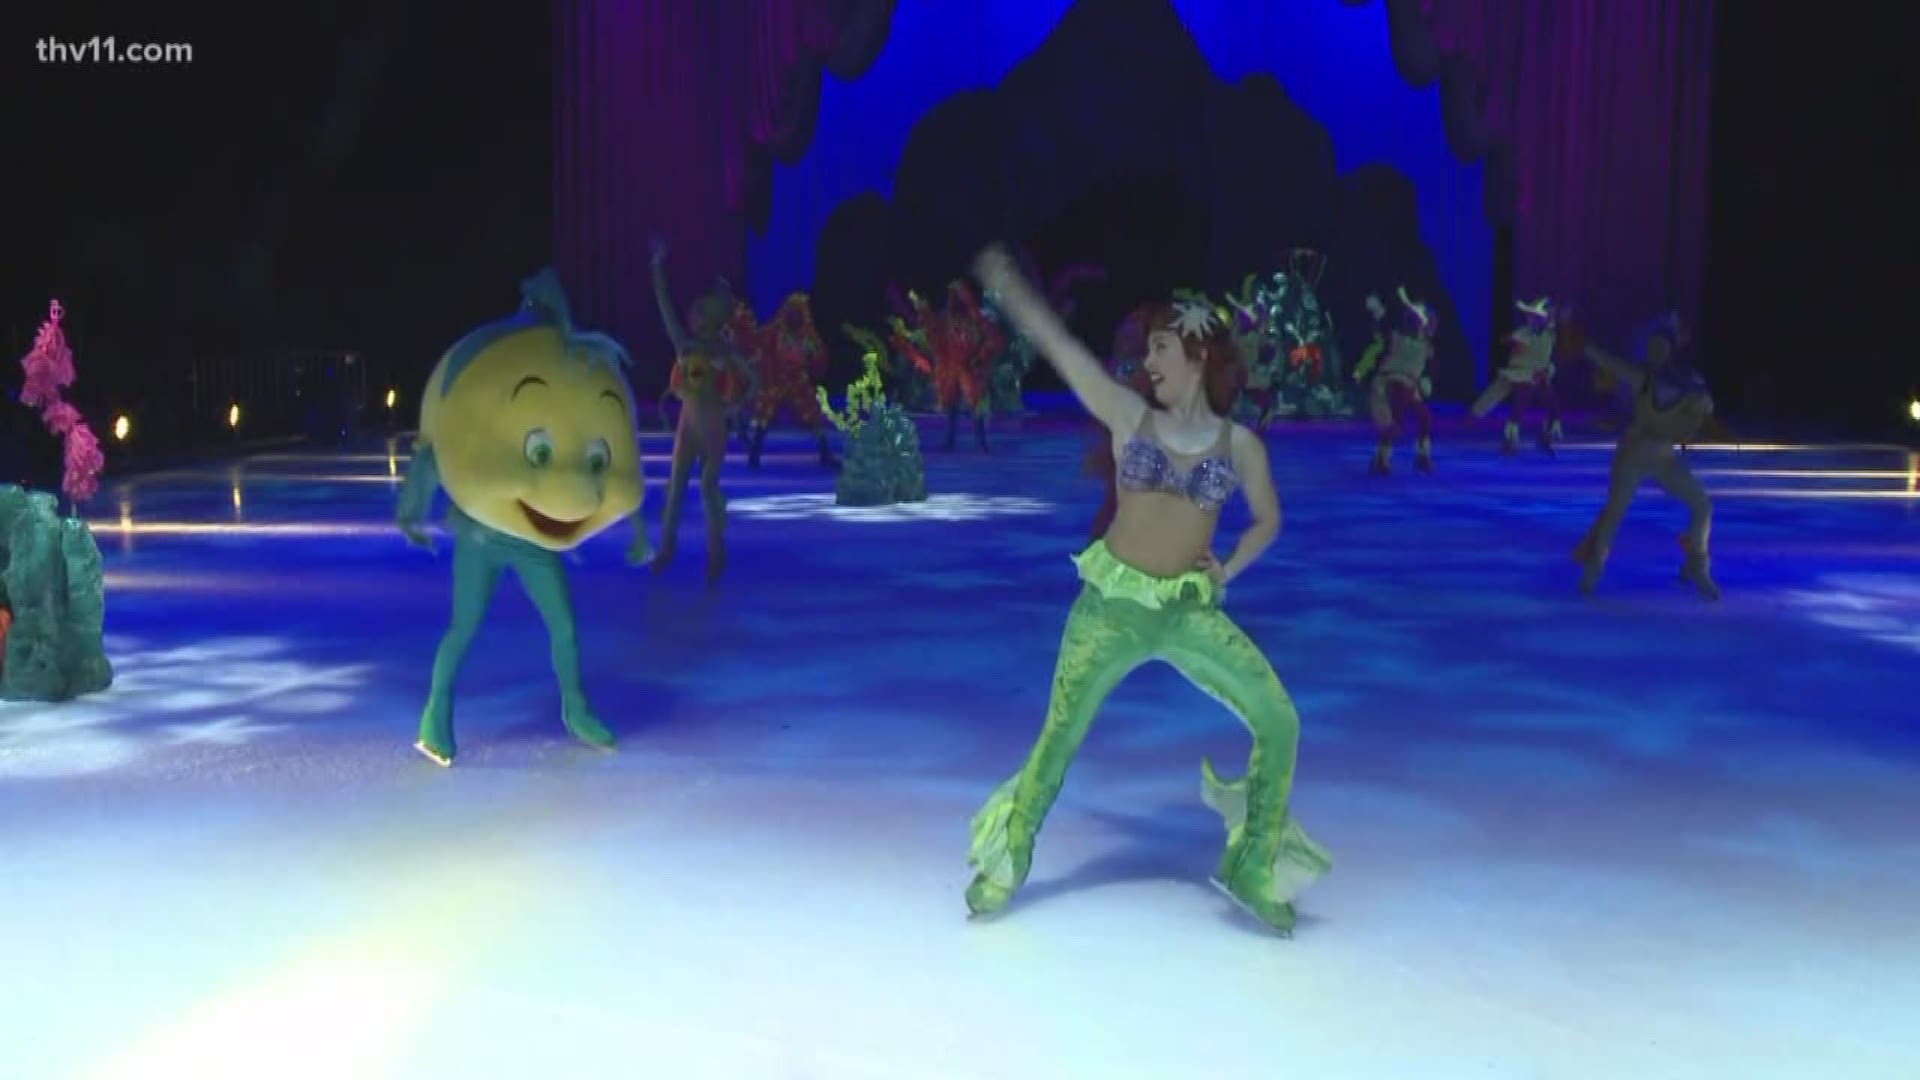 A sneak peek performance of "Under the Sea" from "The Little Mermaid."